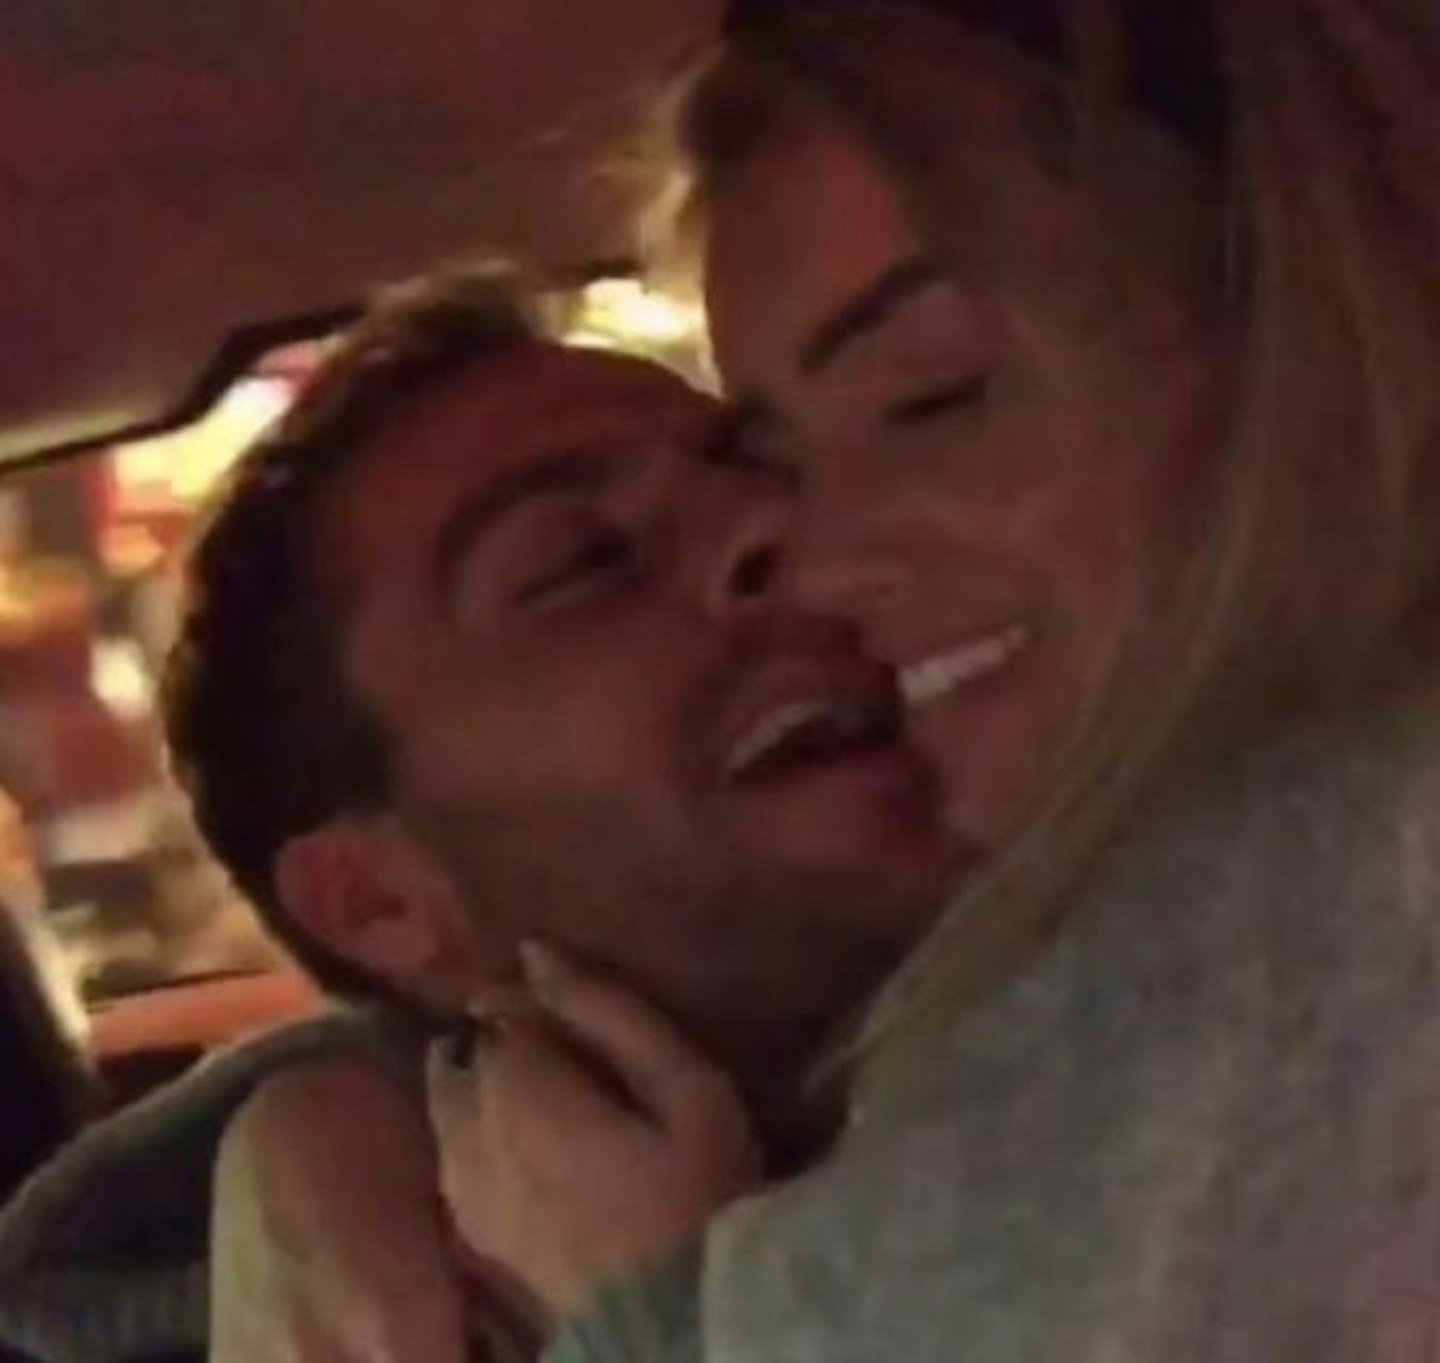 Laura Anderson and Max Morley